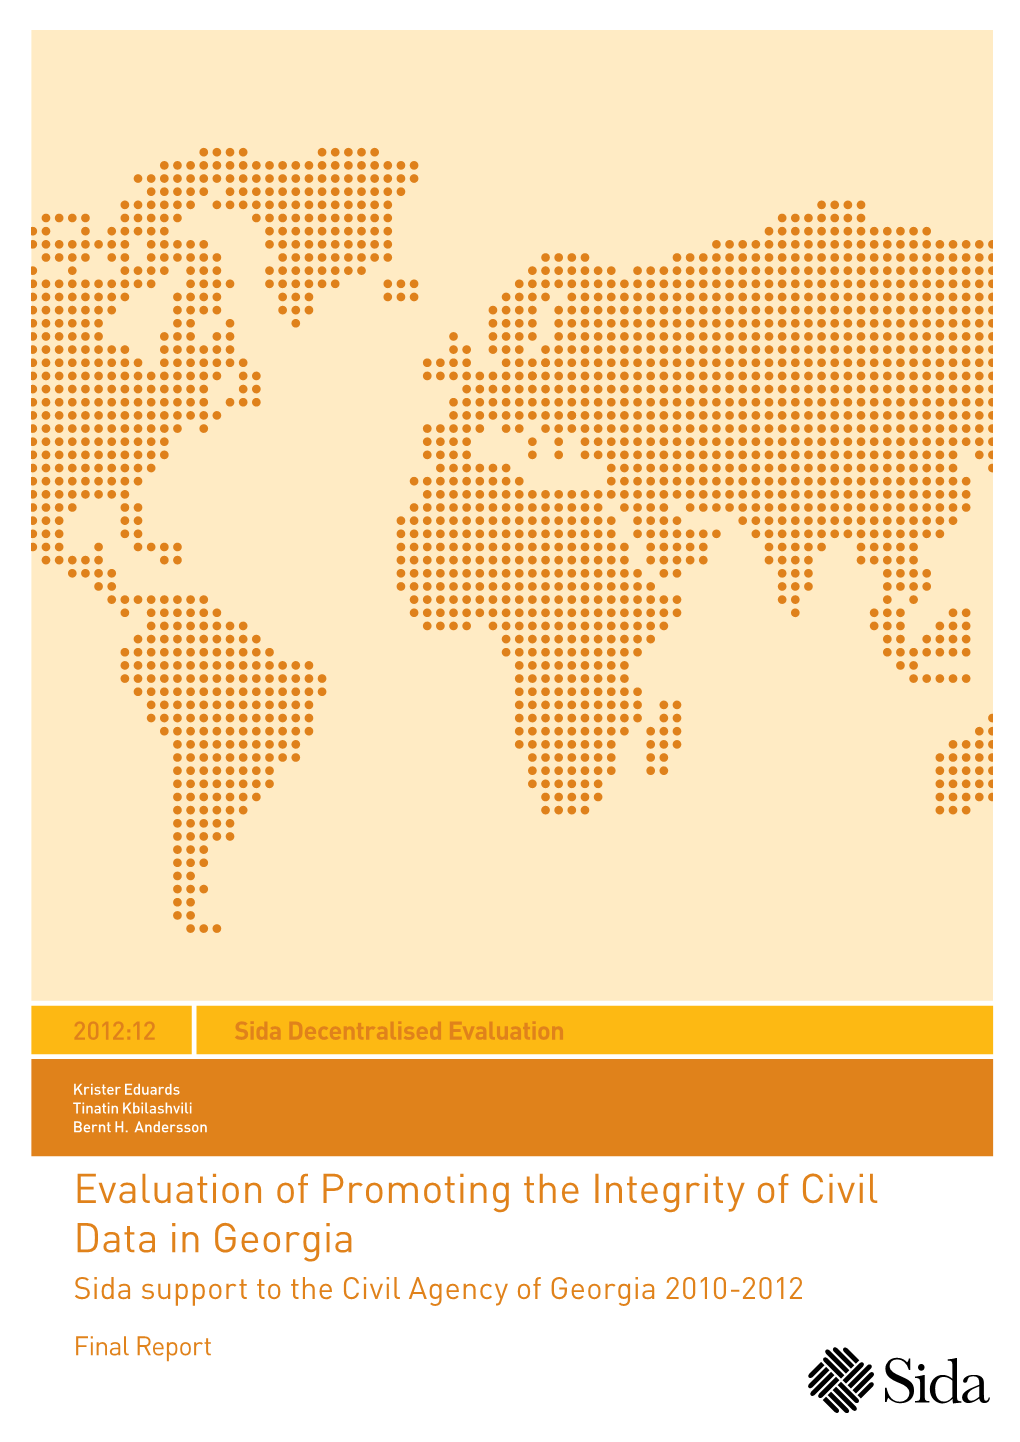 Evaluation of Promoting the Integrity of Civil Data in Georgia Sida Support to the Civil Agency of Georgia 2010-2012